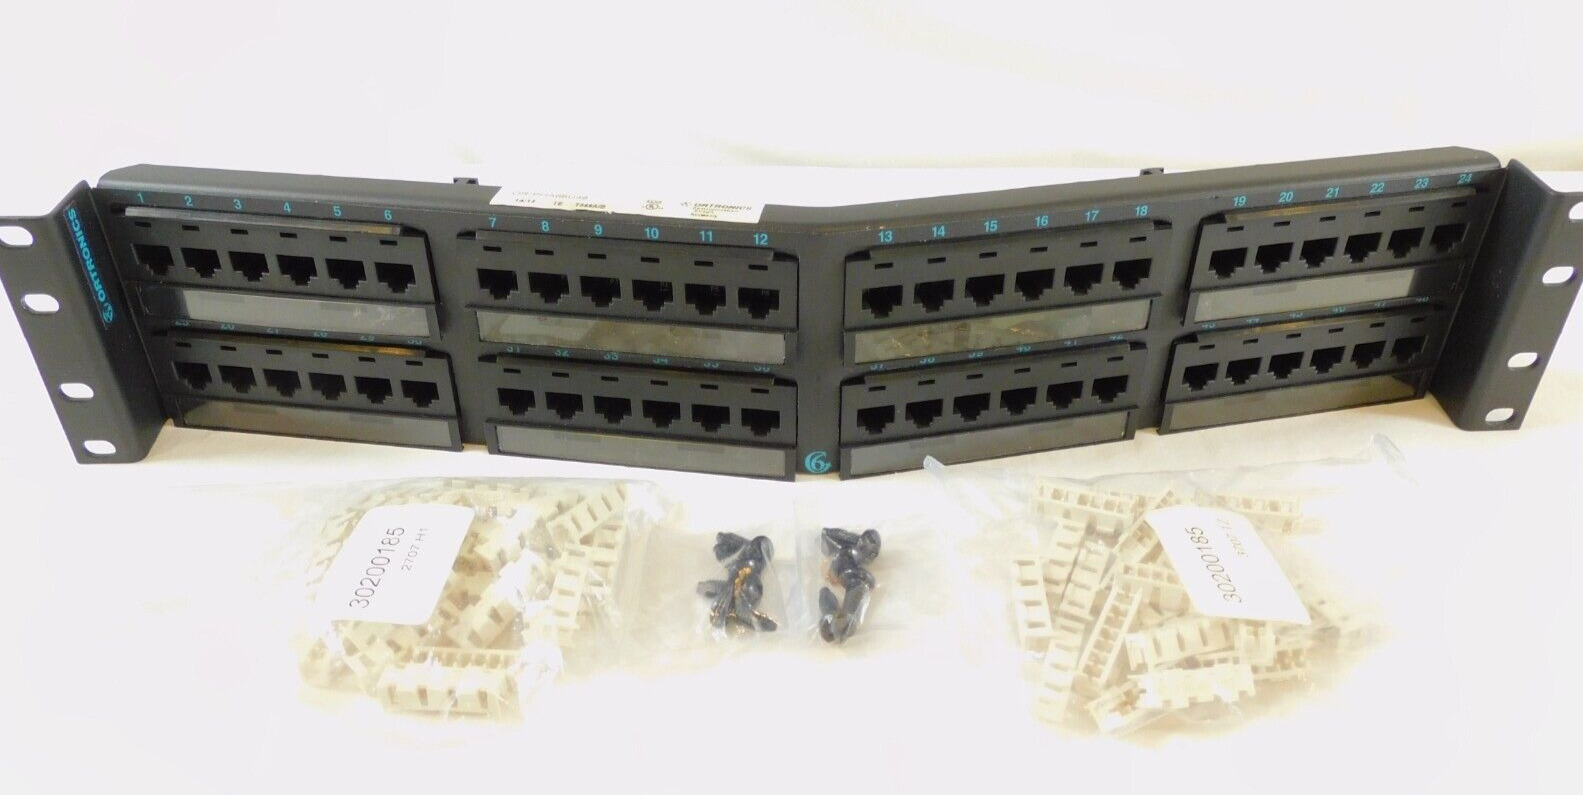 Category 6 Patch Panel OR-PHA66U48 Ortronics Clarity 6 Angled 48-Port